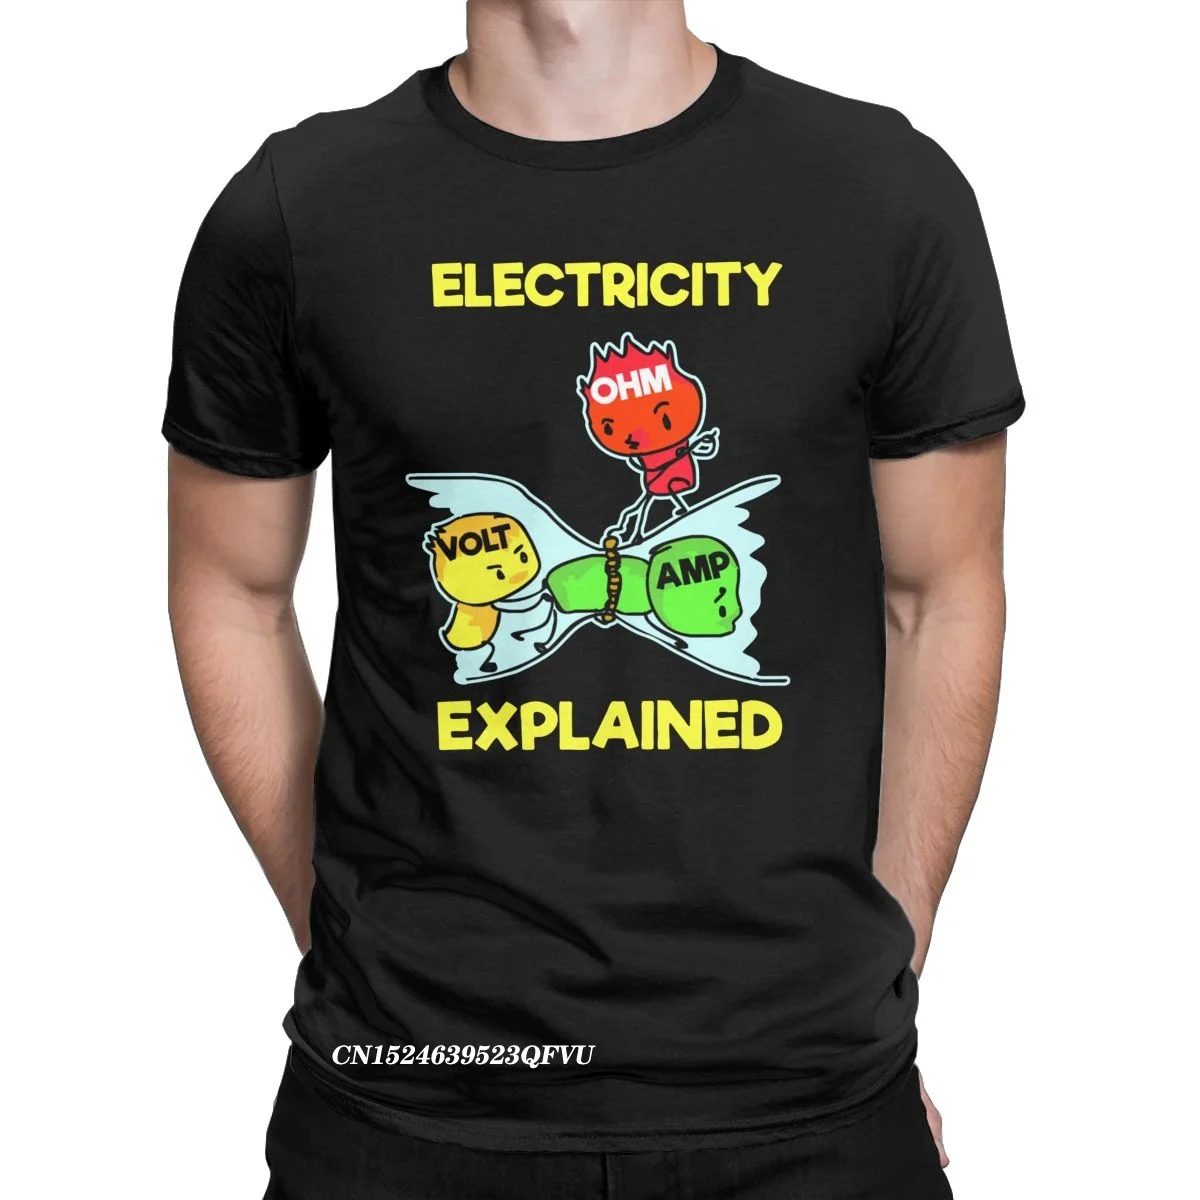 

Electricity Explained Science Shirt For Geeks Men Tshirt Ohm's Law Fashion Tee Shirt Pure Cotton Plus Size T-Shirts Clothing